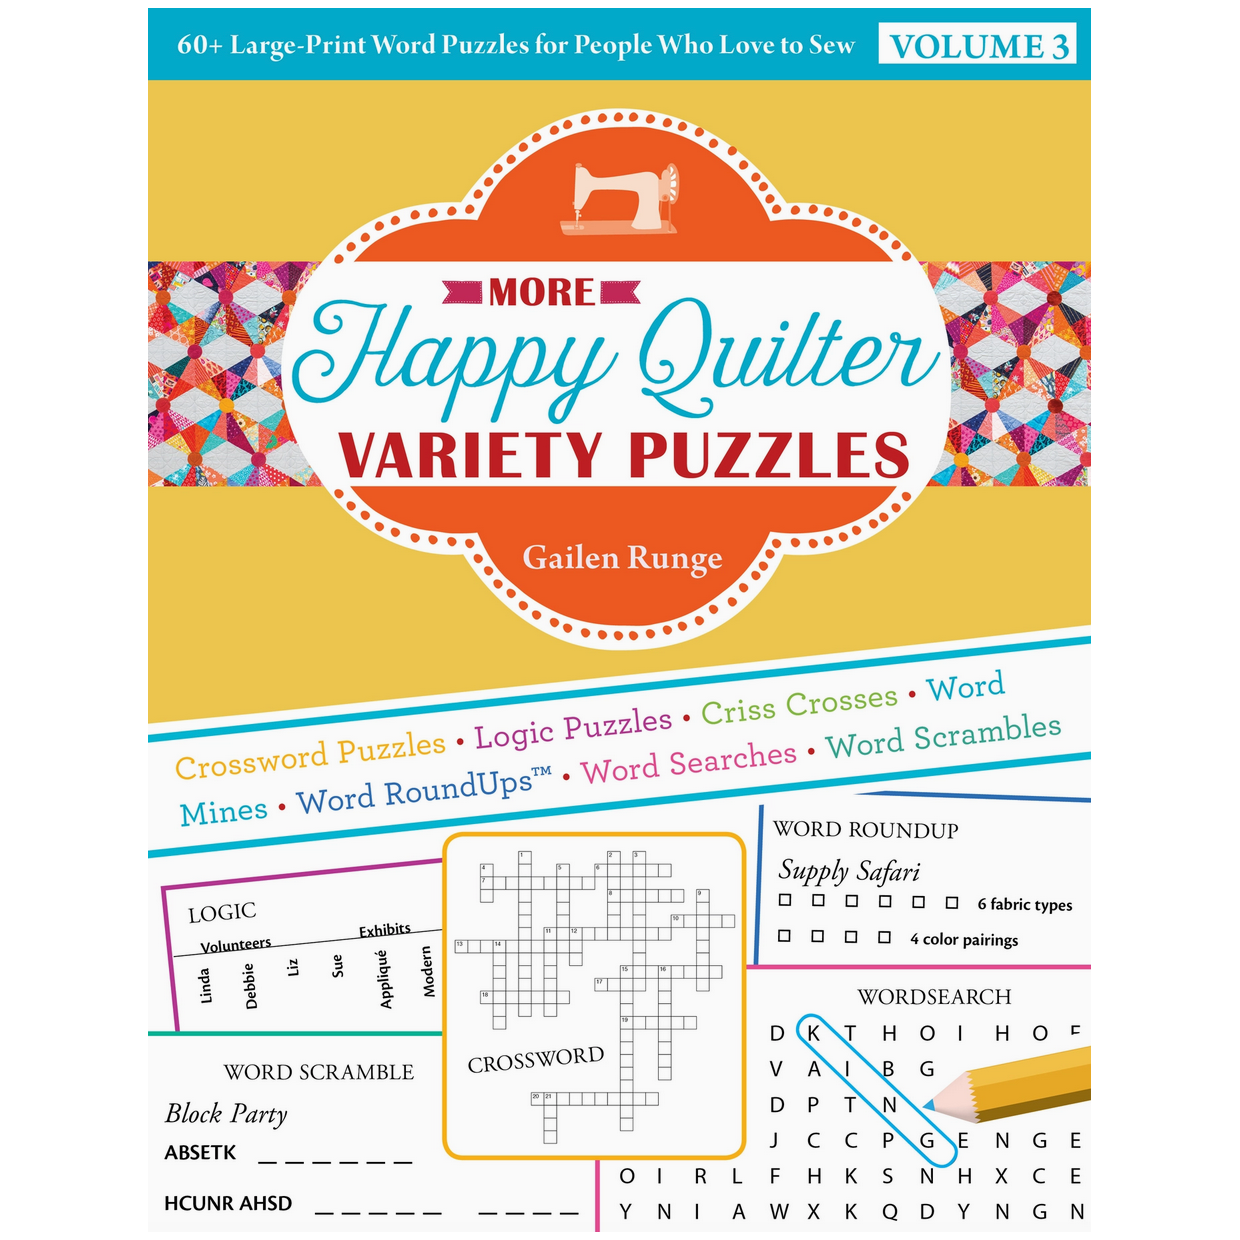 More Happy Quilter Variety Puzzles